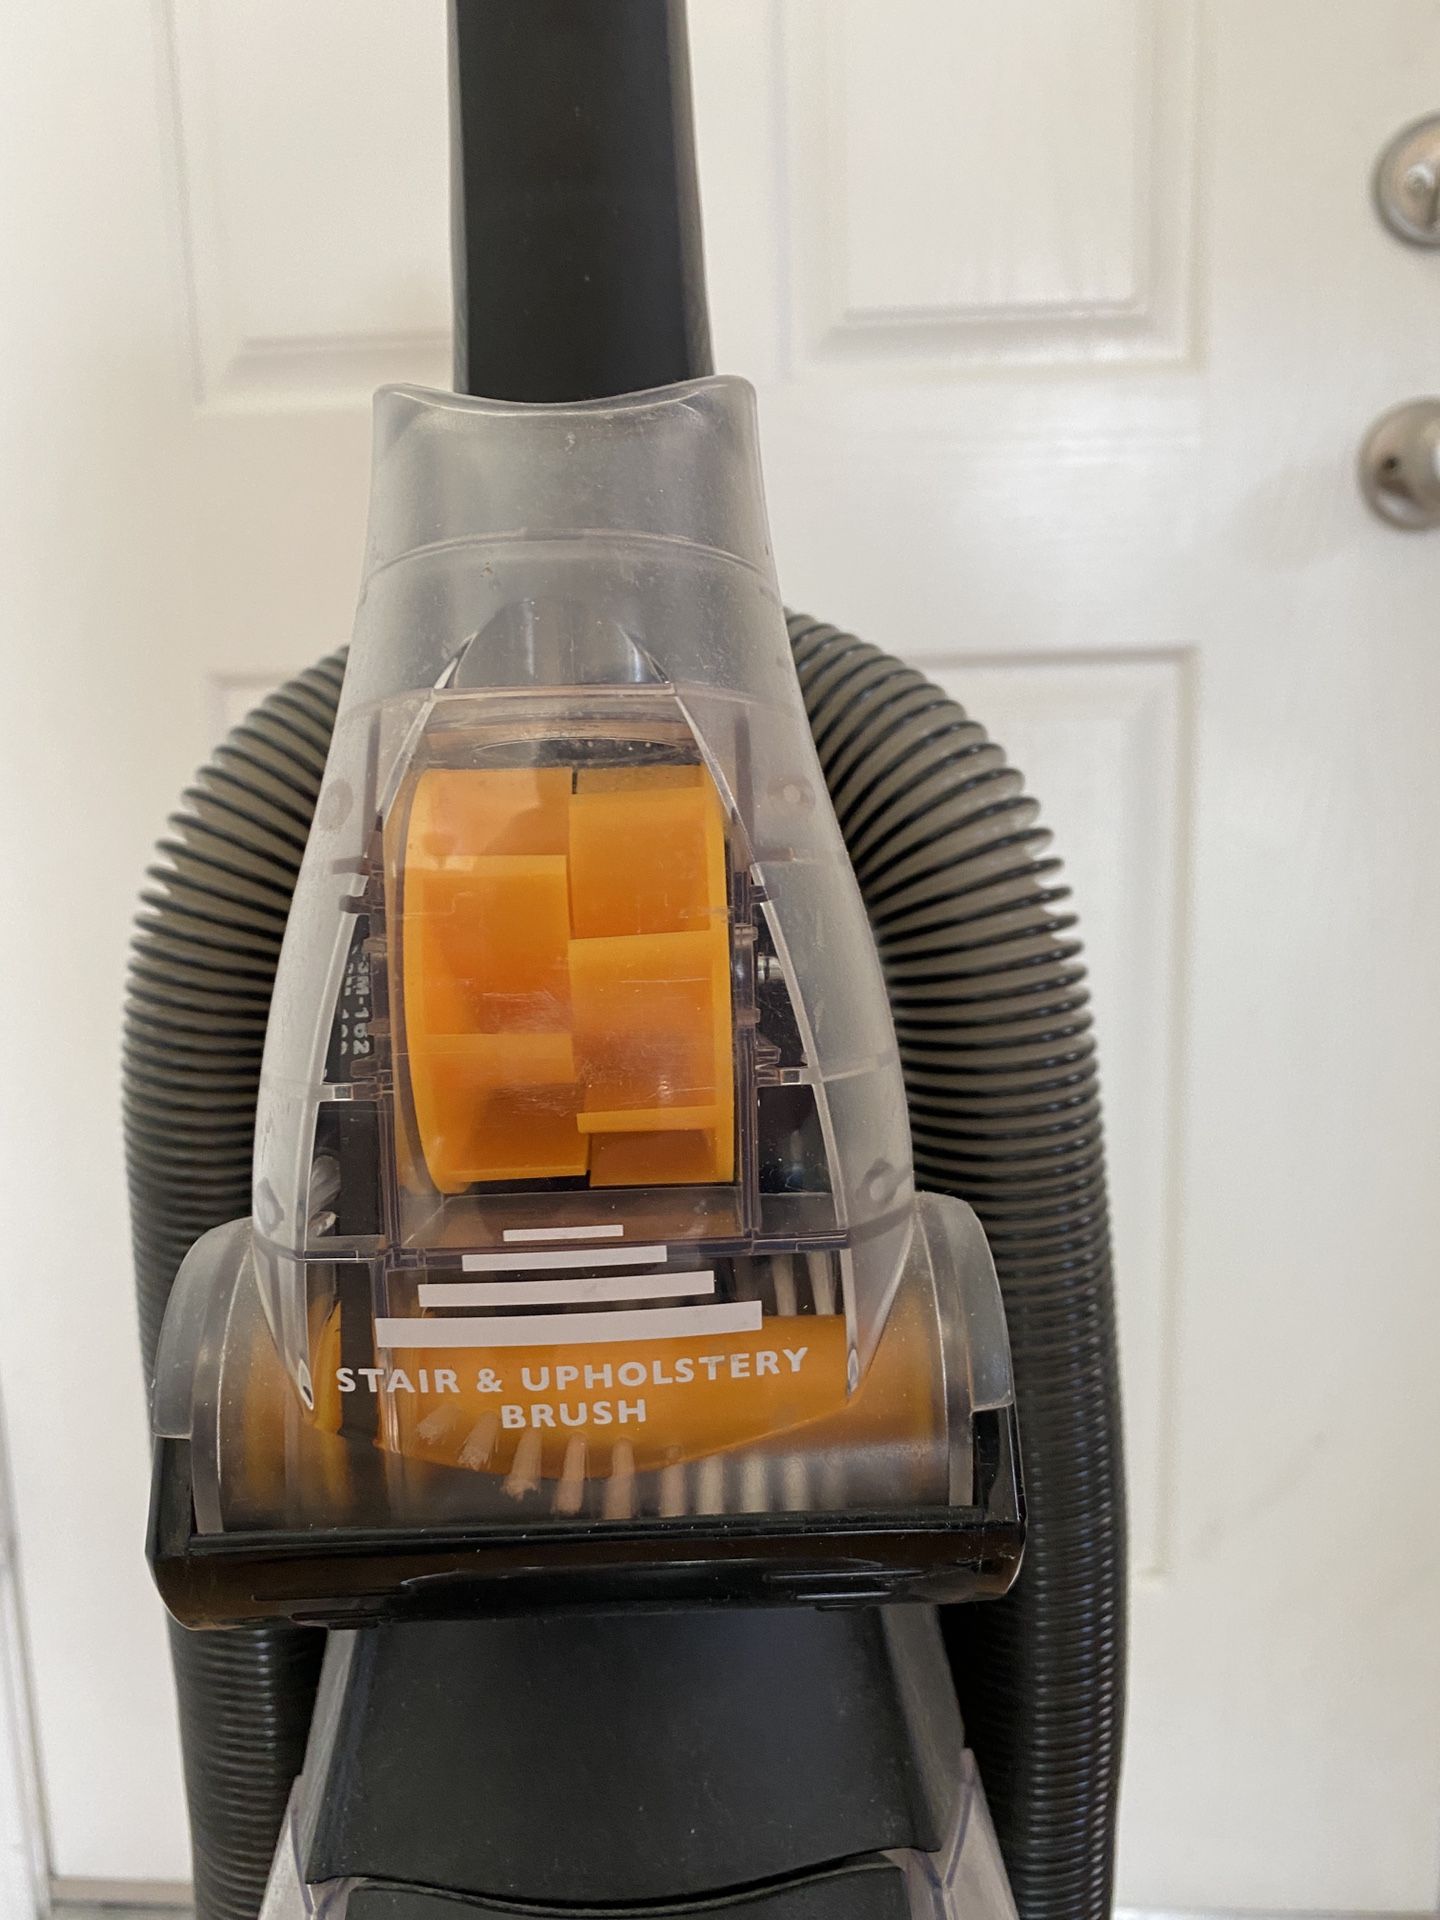 Dust Daddy vacuum attachment for Sale in Paramount, CA - OfferUp